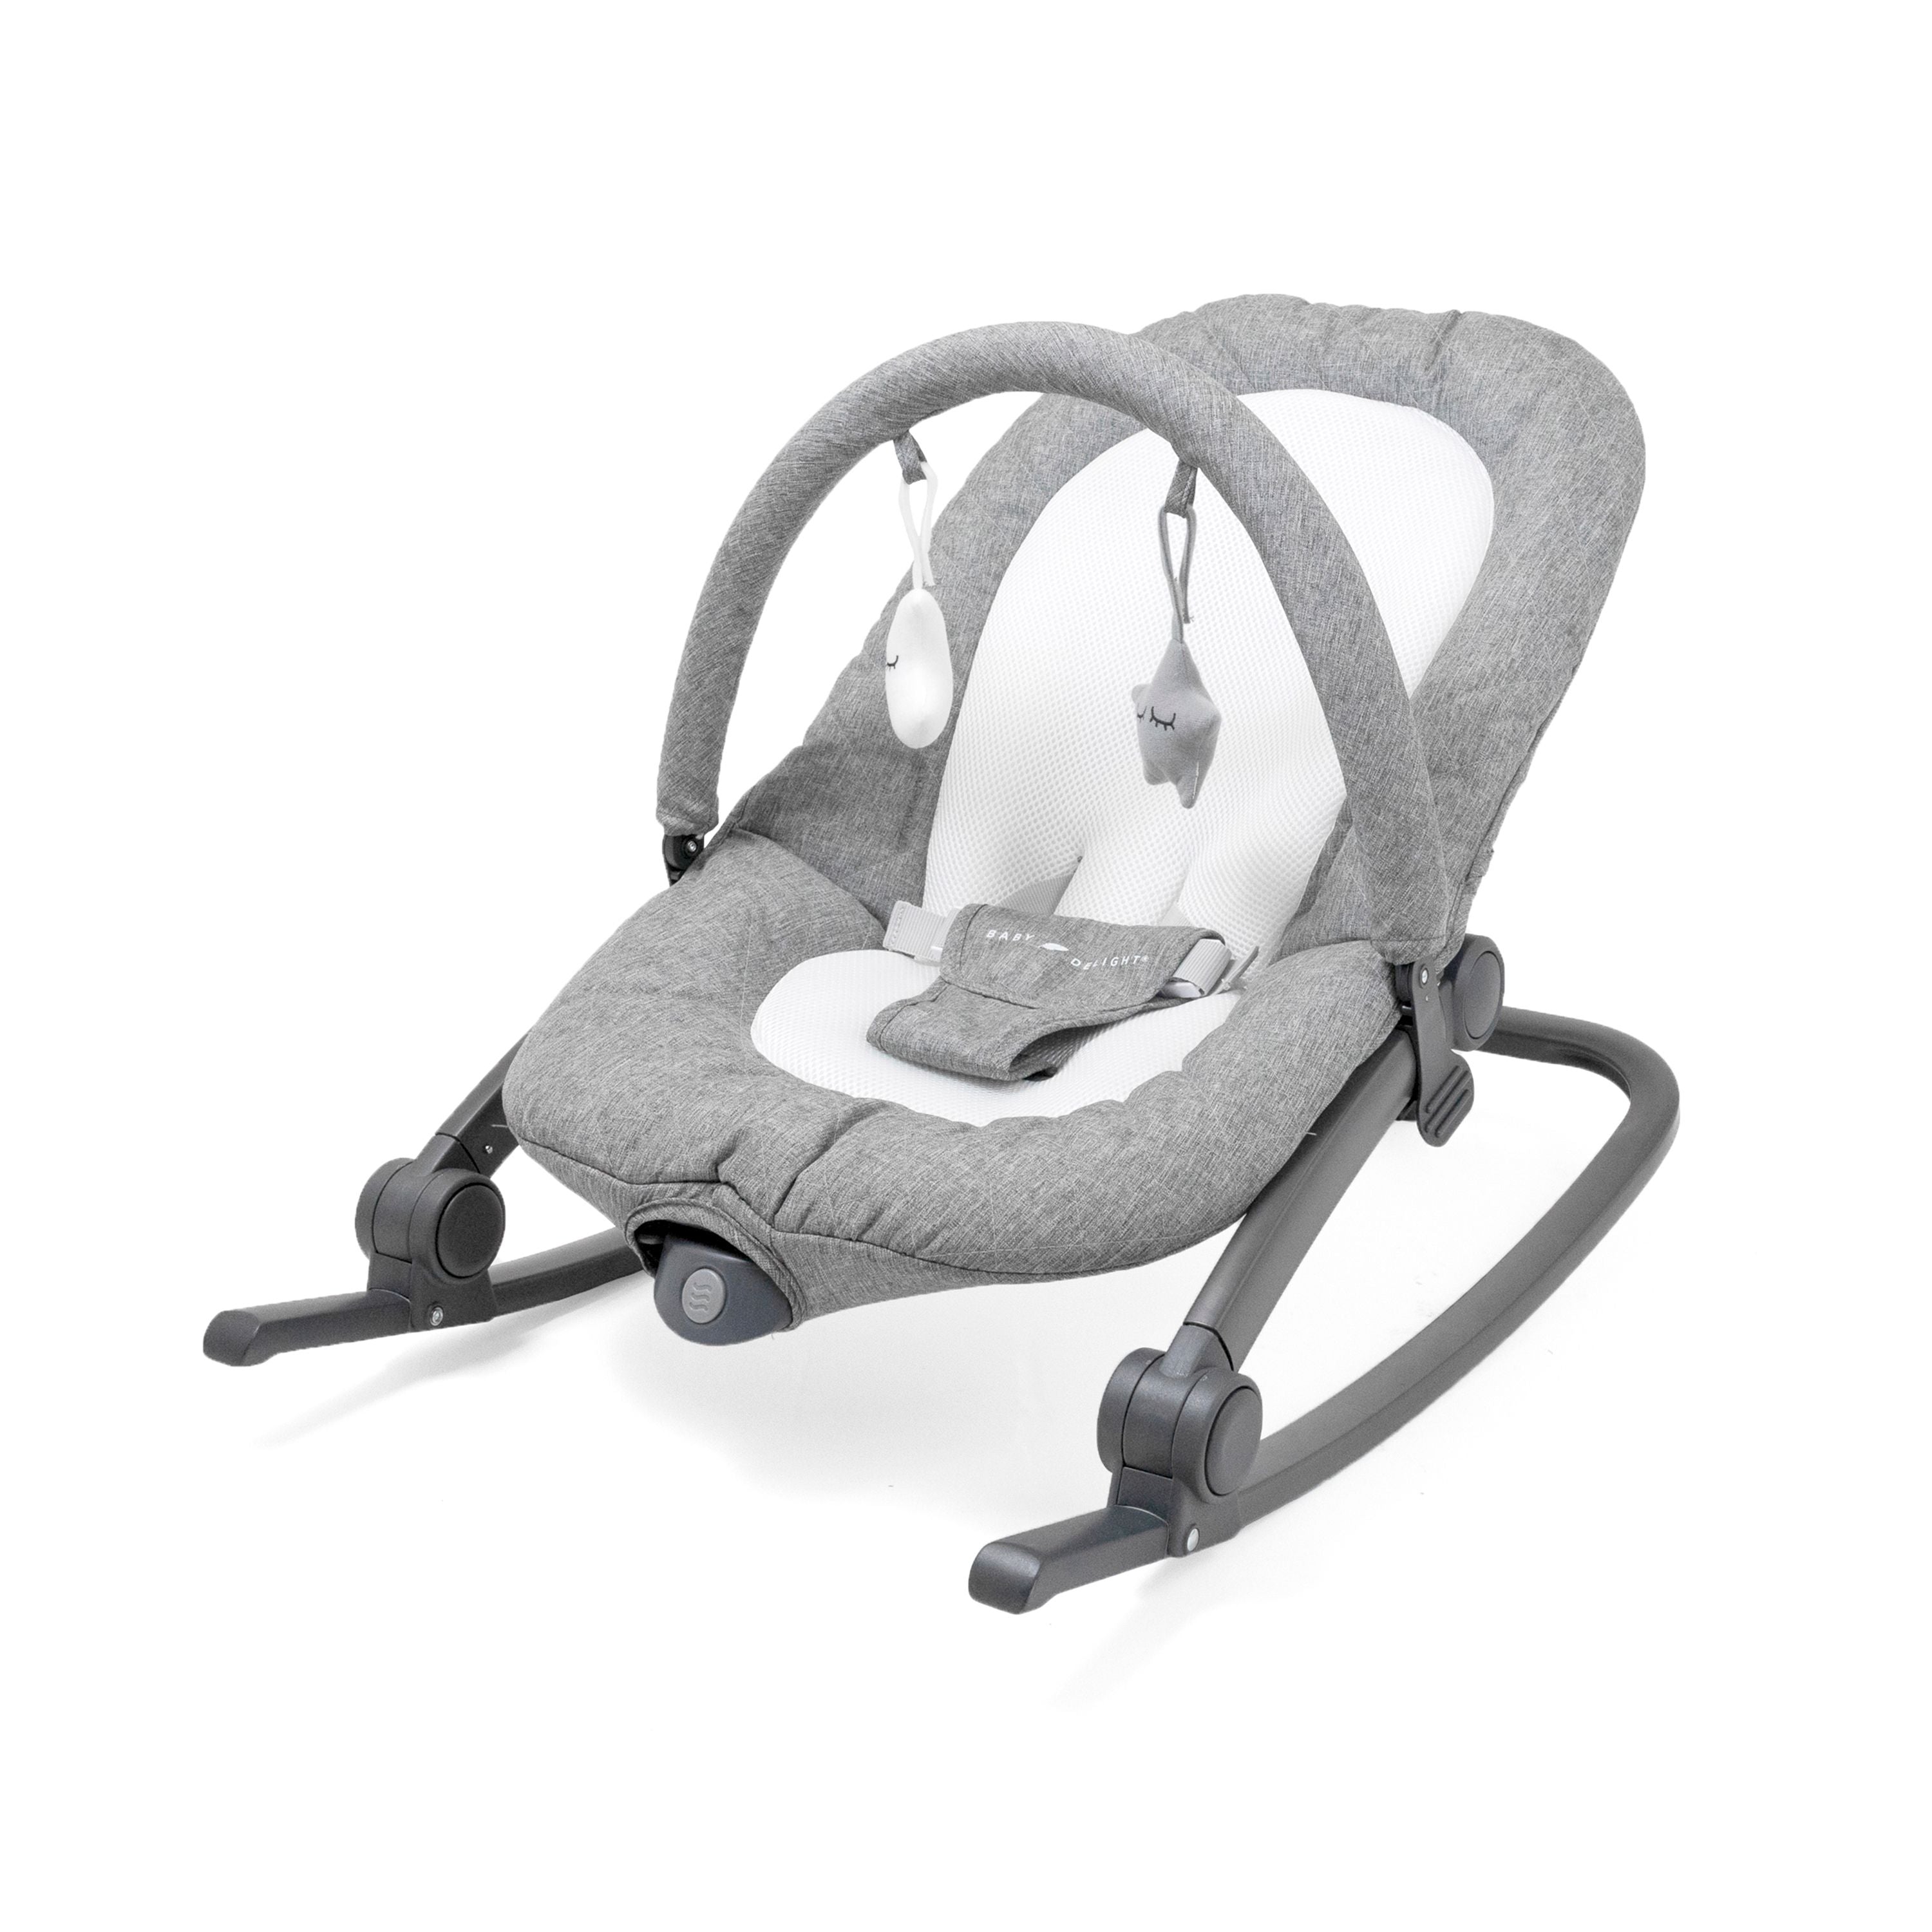 Up&Down Baby Bouncer IV heather grey